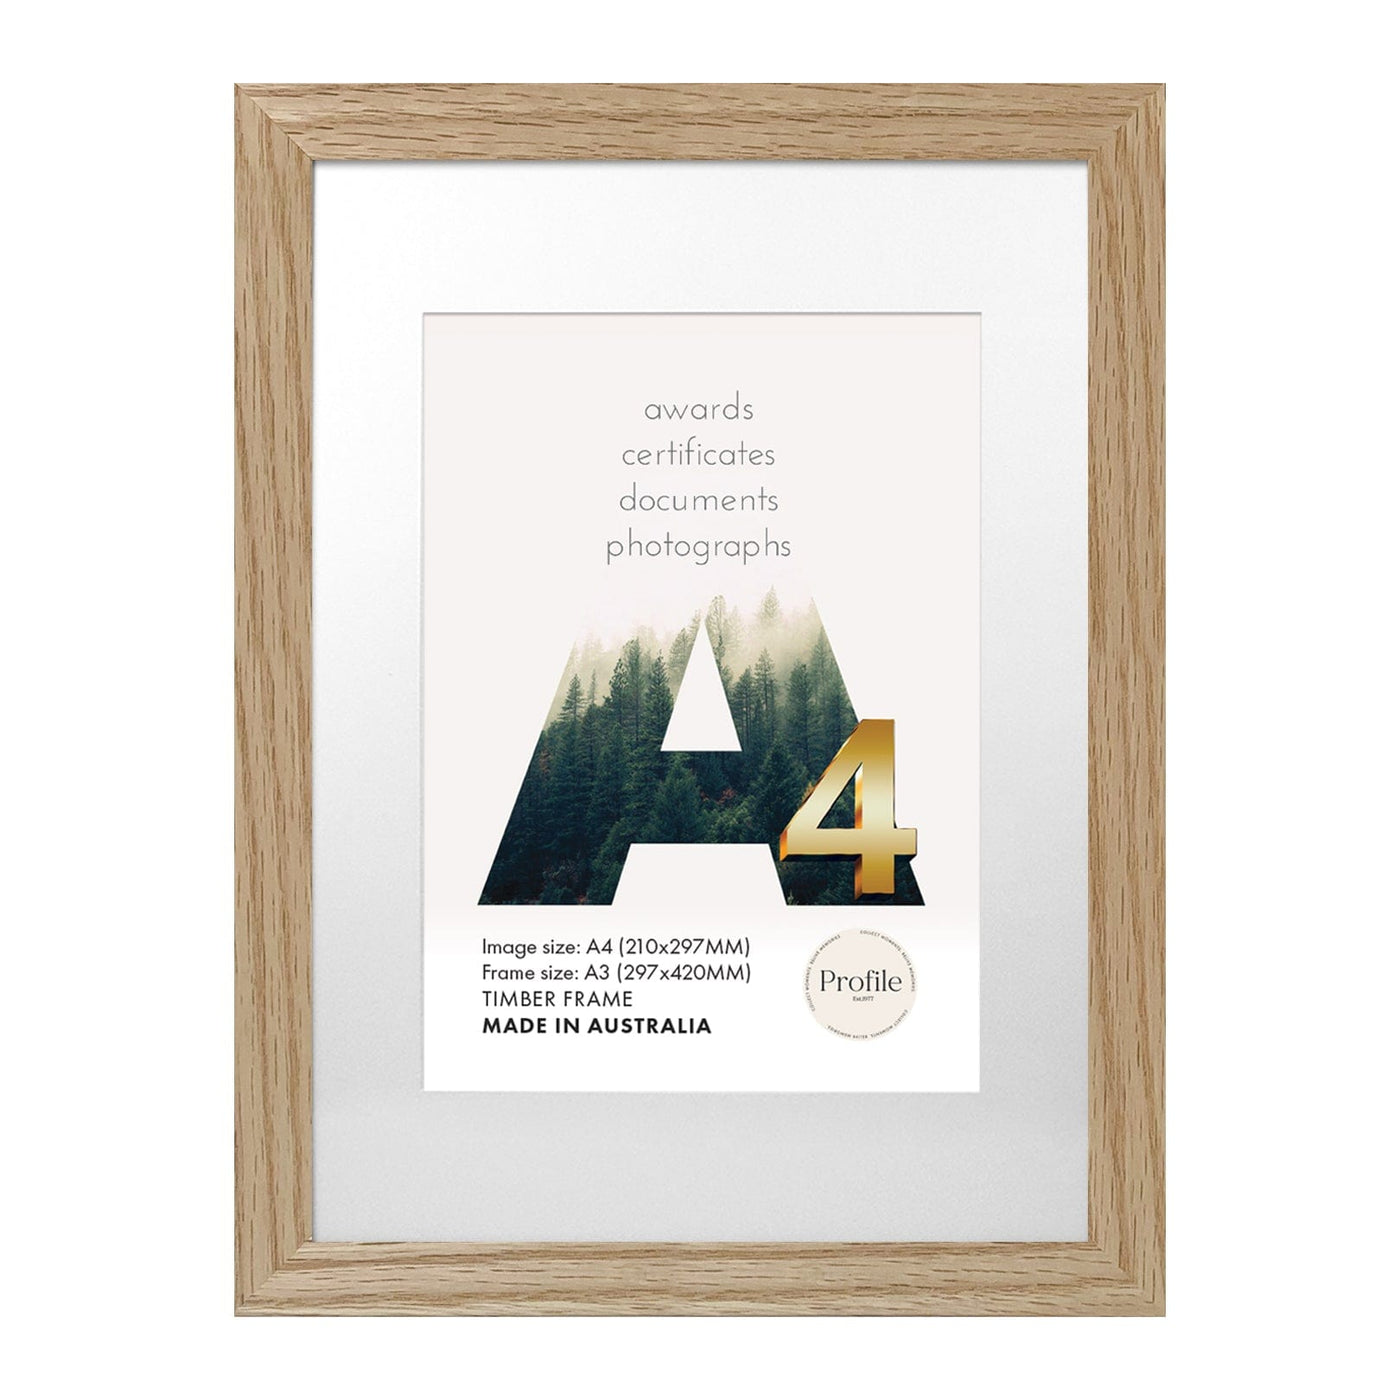 Classic Natural Oak Poster Frame A3 (30x42cm) to suit A4 (21x30cm) image from our Australian Made Picture Frames collection by Profile Products Australia